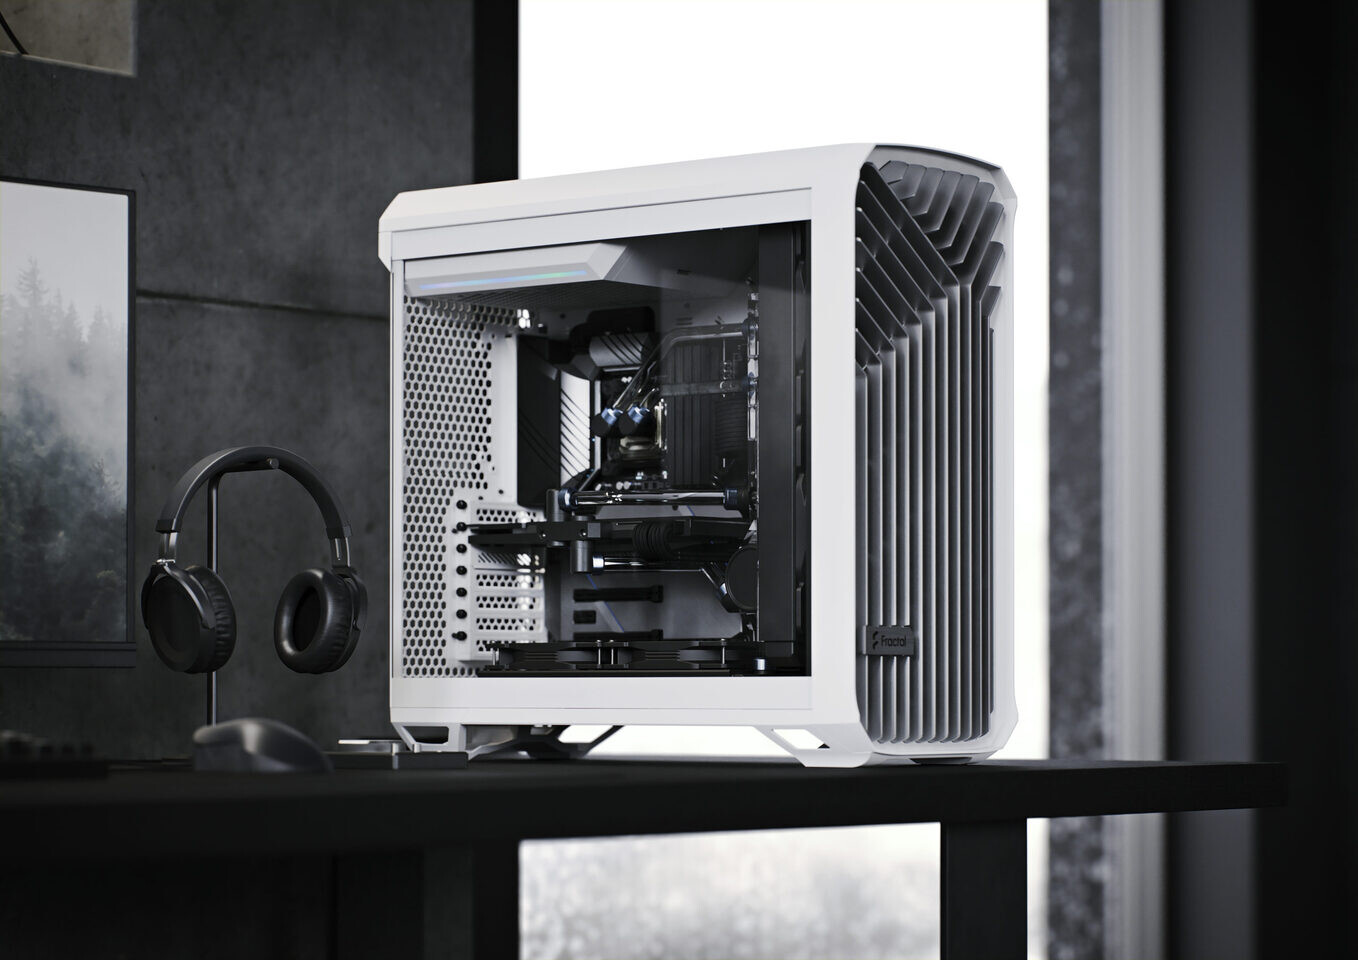 Fractal Design Torrent in review - new case for maximum airflow